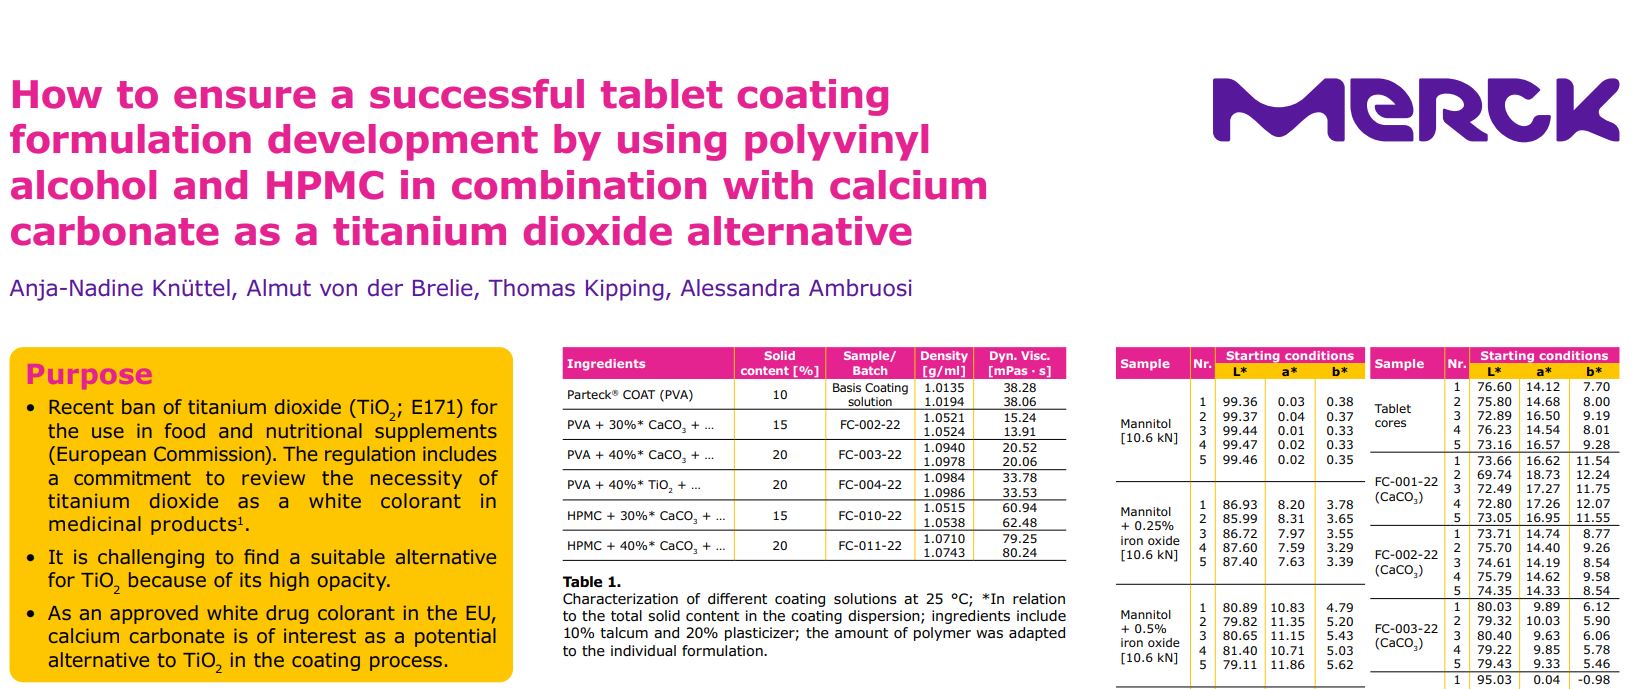 How to ensure a successful tablet coating formulation development by using polyvinyl alcohol and HPMC in combination with calcium carbonate as a titanium dioxide alternative